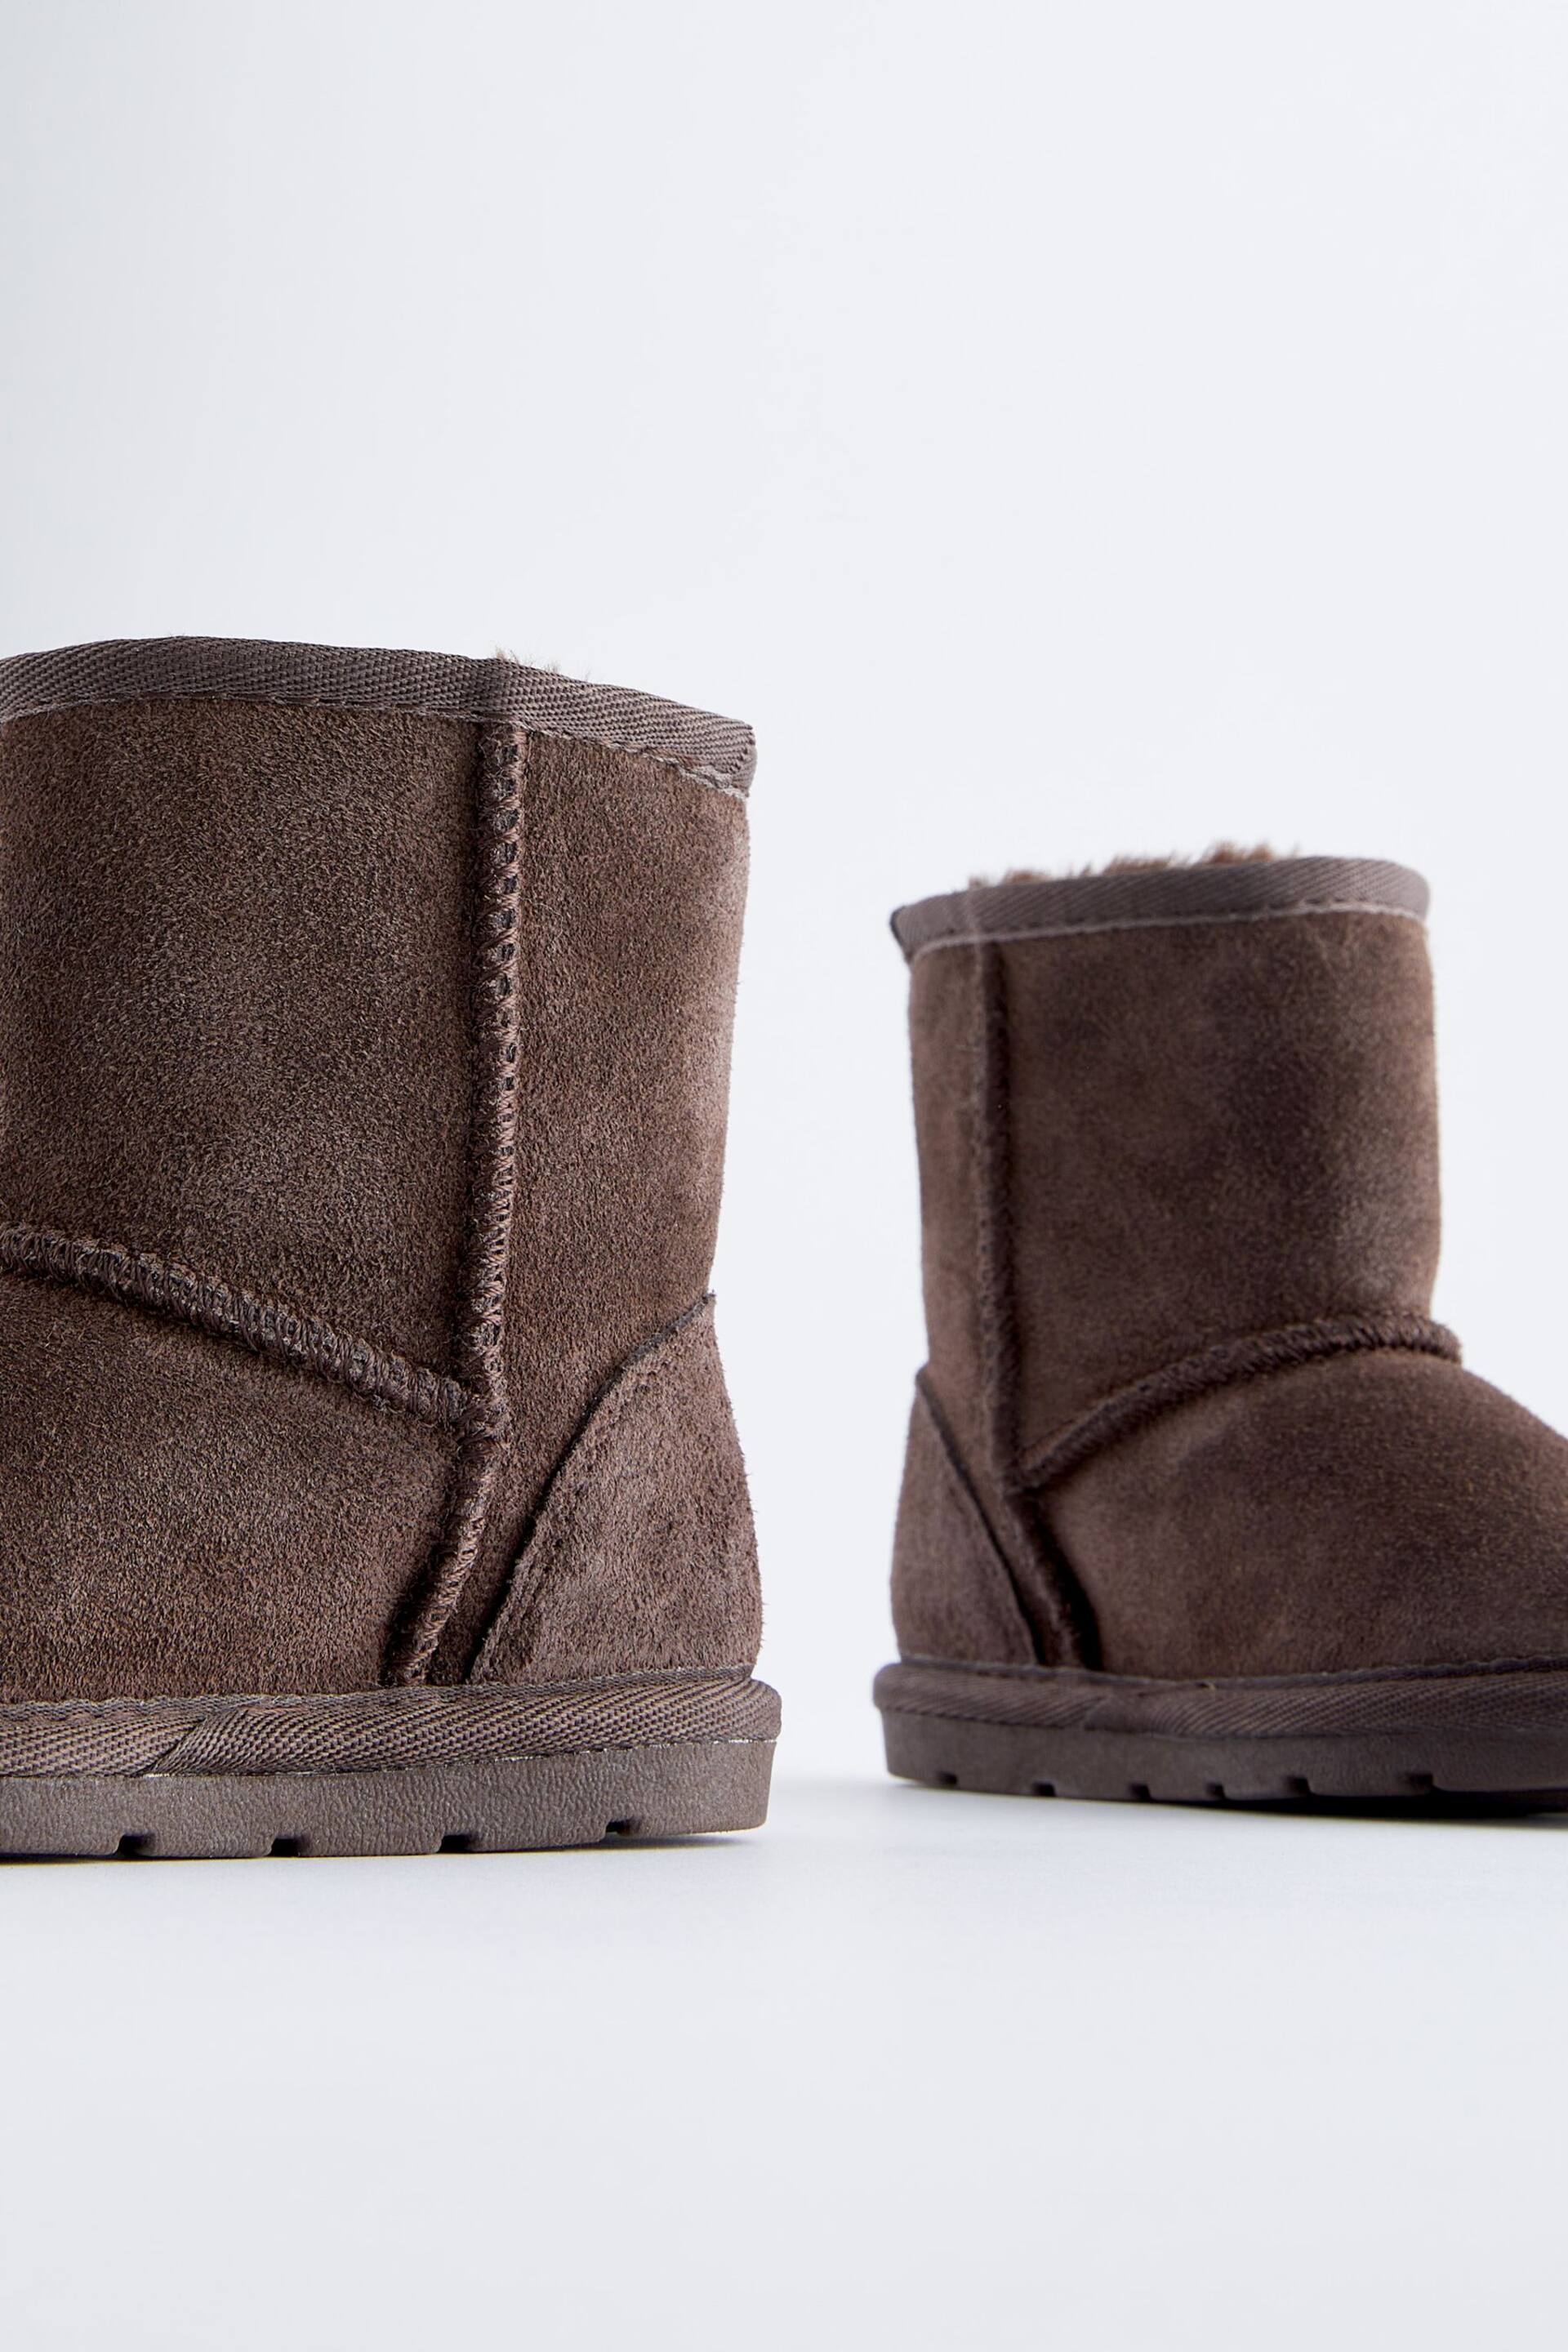 Chocolate Brown Short Suede Tall Faux Fur Lined Water Repellent Pull-On Suede Boots - Image 4 of 5